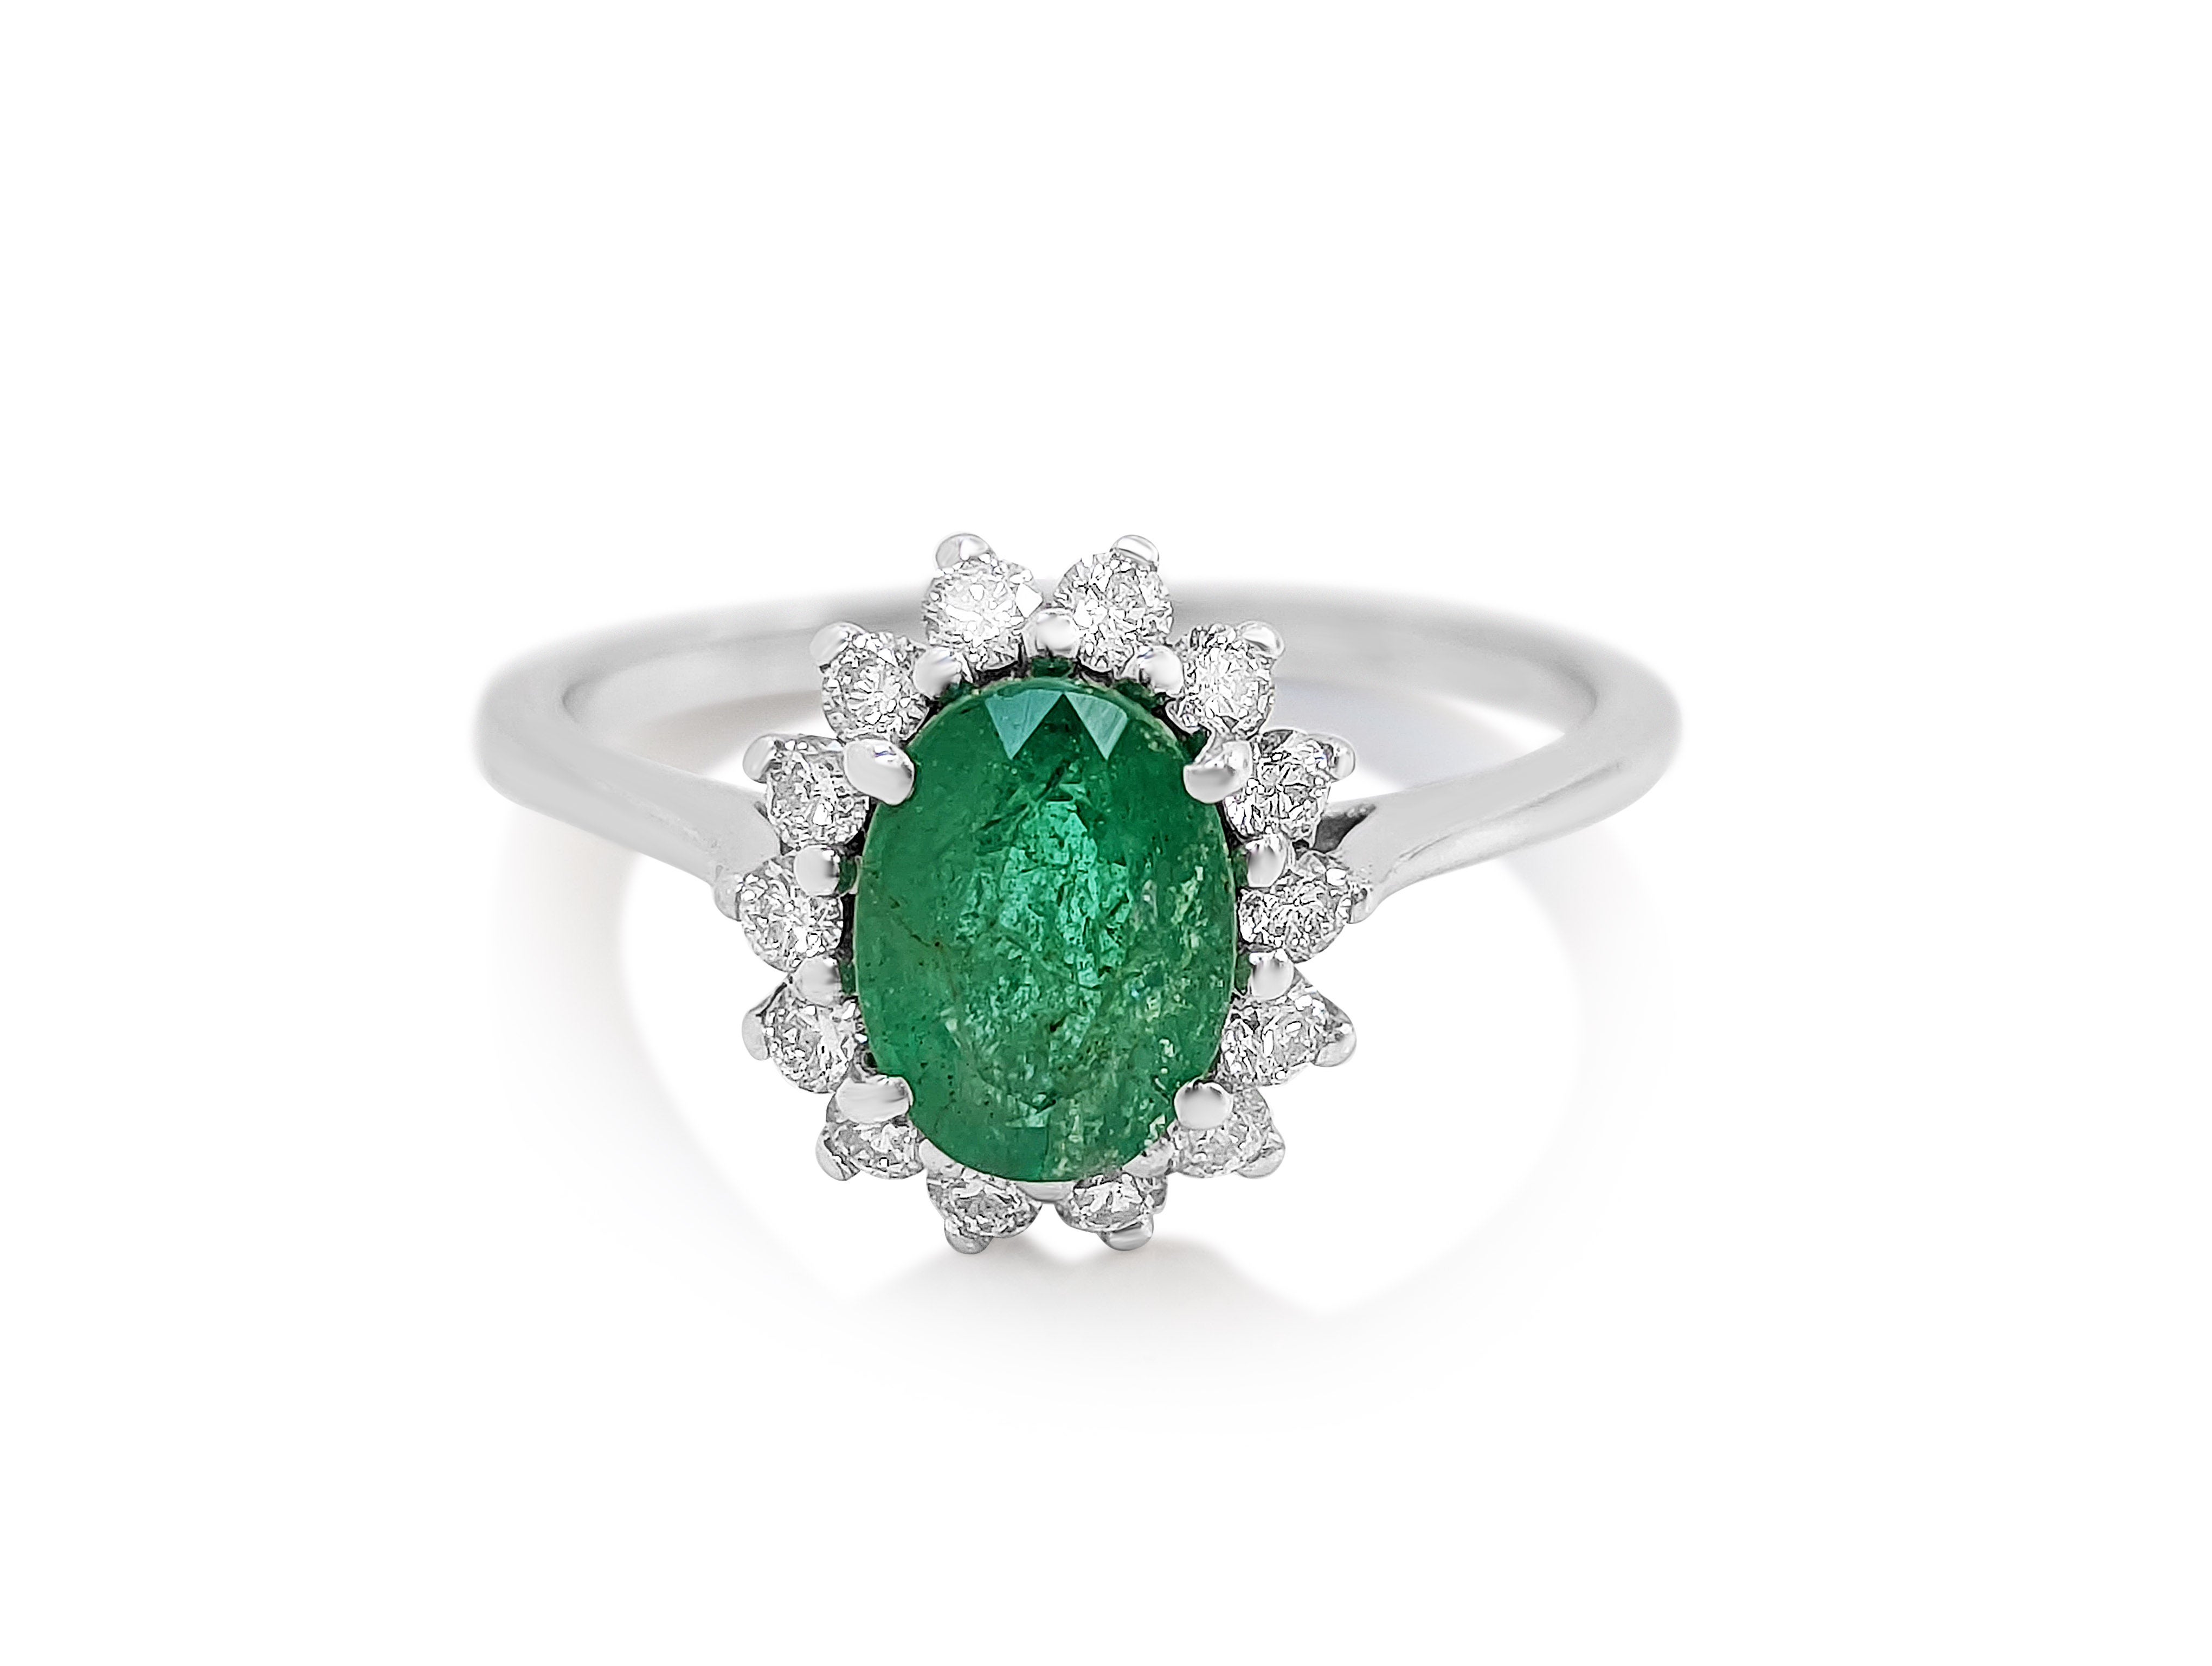 Ring can be sized free of charge prior to shipping out.

Center Stone:
___________
Natural Emerald
Cut: Oval Mixed
Carat: 1.14  ct
Color: Green

Side Stones:
___________
Natural Diamonds
Cut: Round 
Carat: 0.35 tccw / 54 stones
Color: E-H
Clarity: